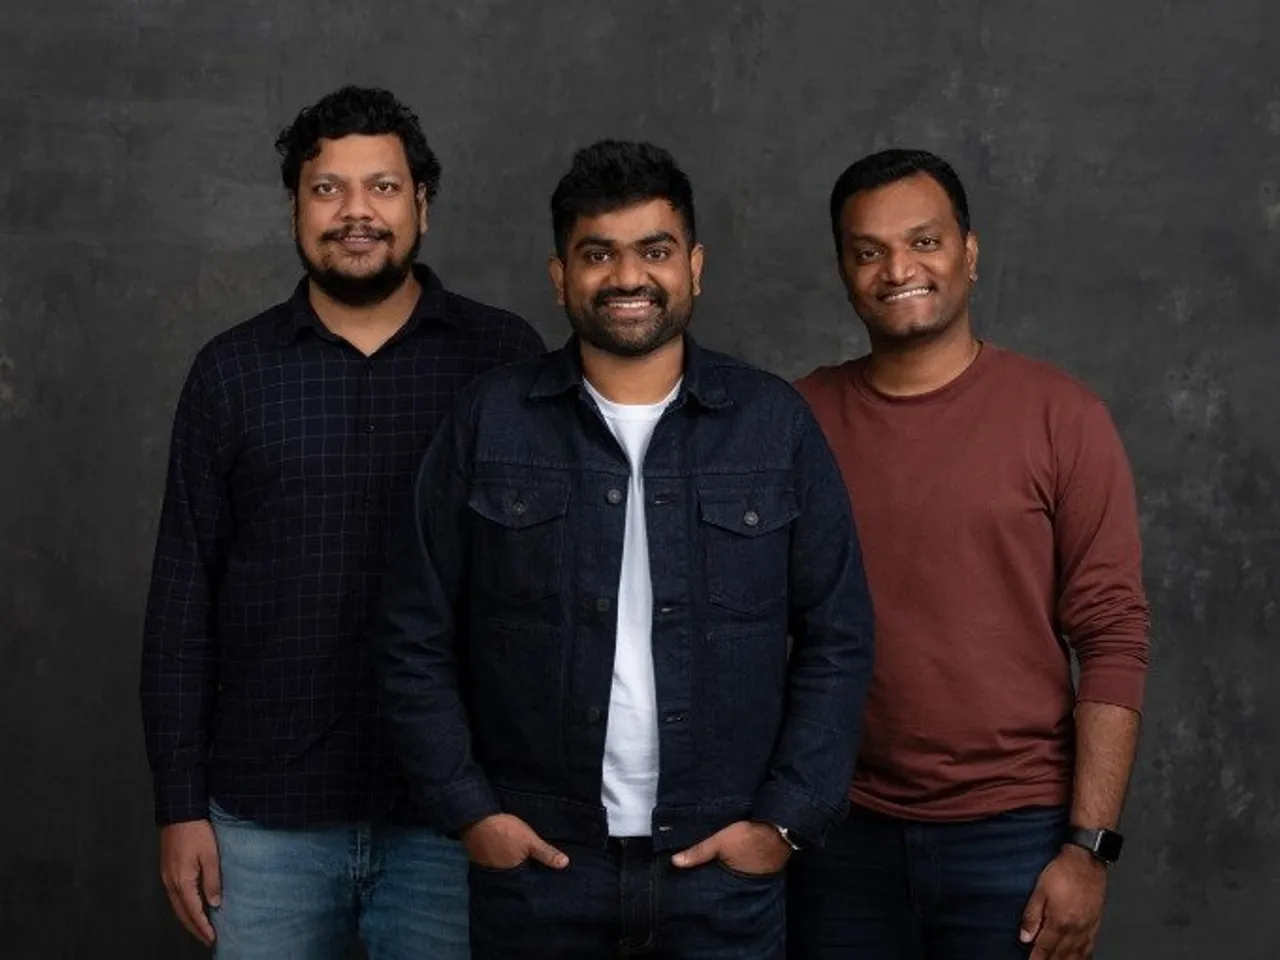 Recruitment automation platform Kula raises $12M in a Seed round led by Sequoia, others